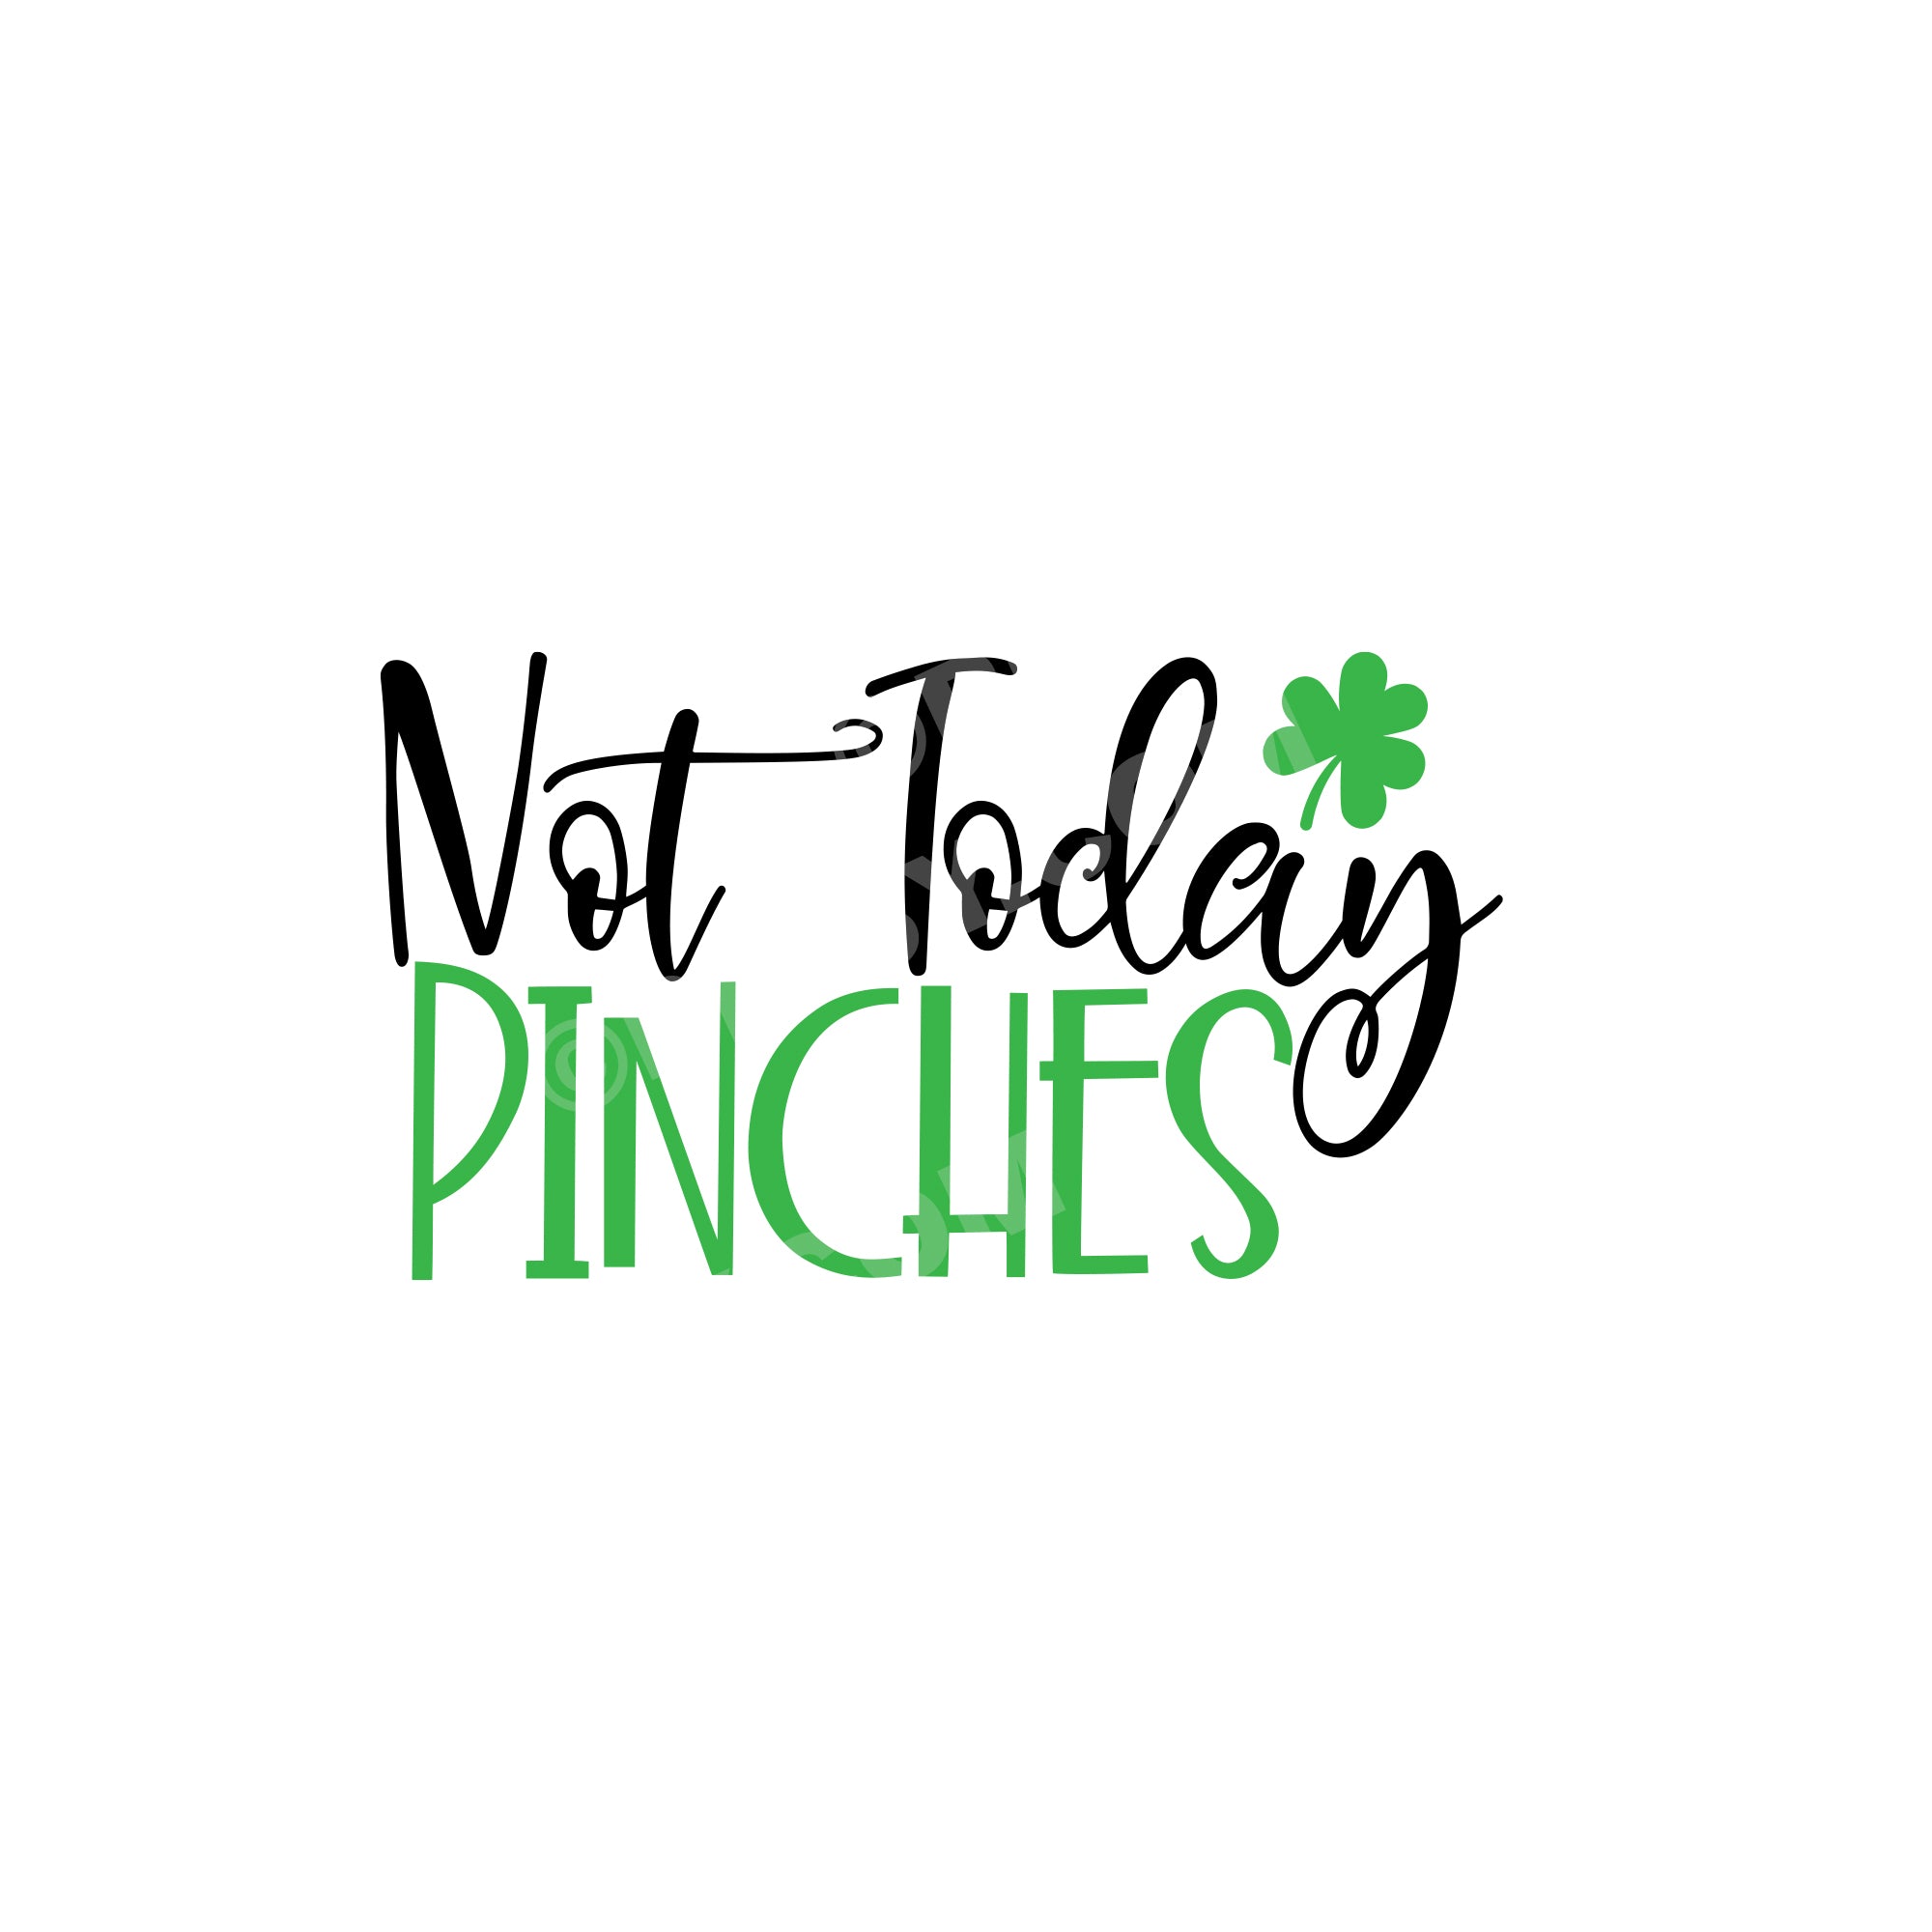 St. Patrick's Day Tea Towel, Not today Pinches